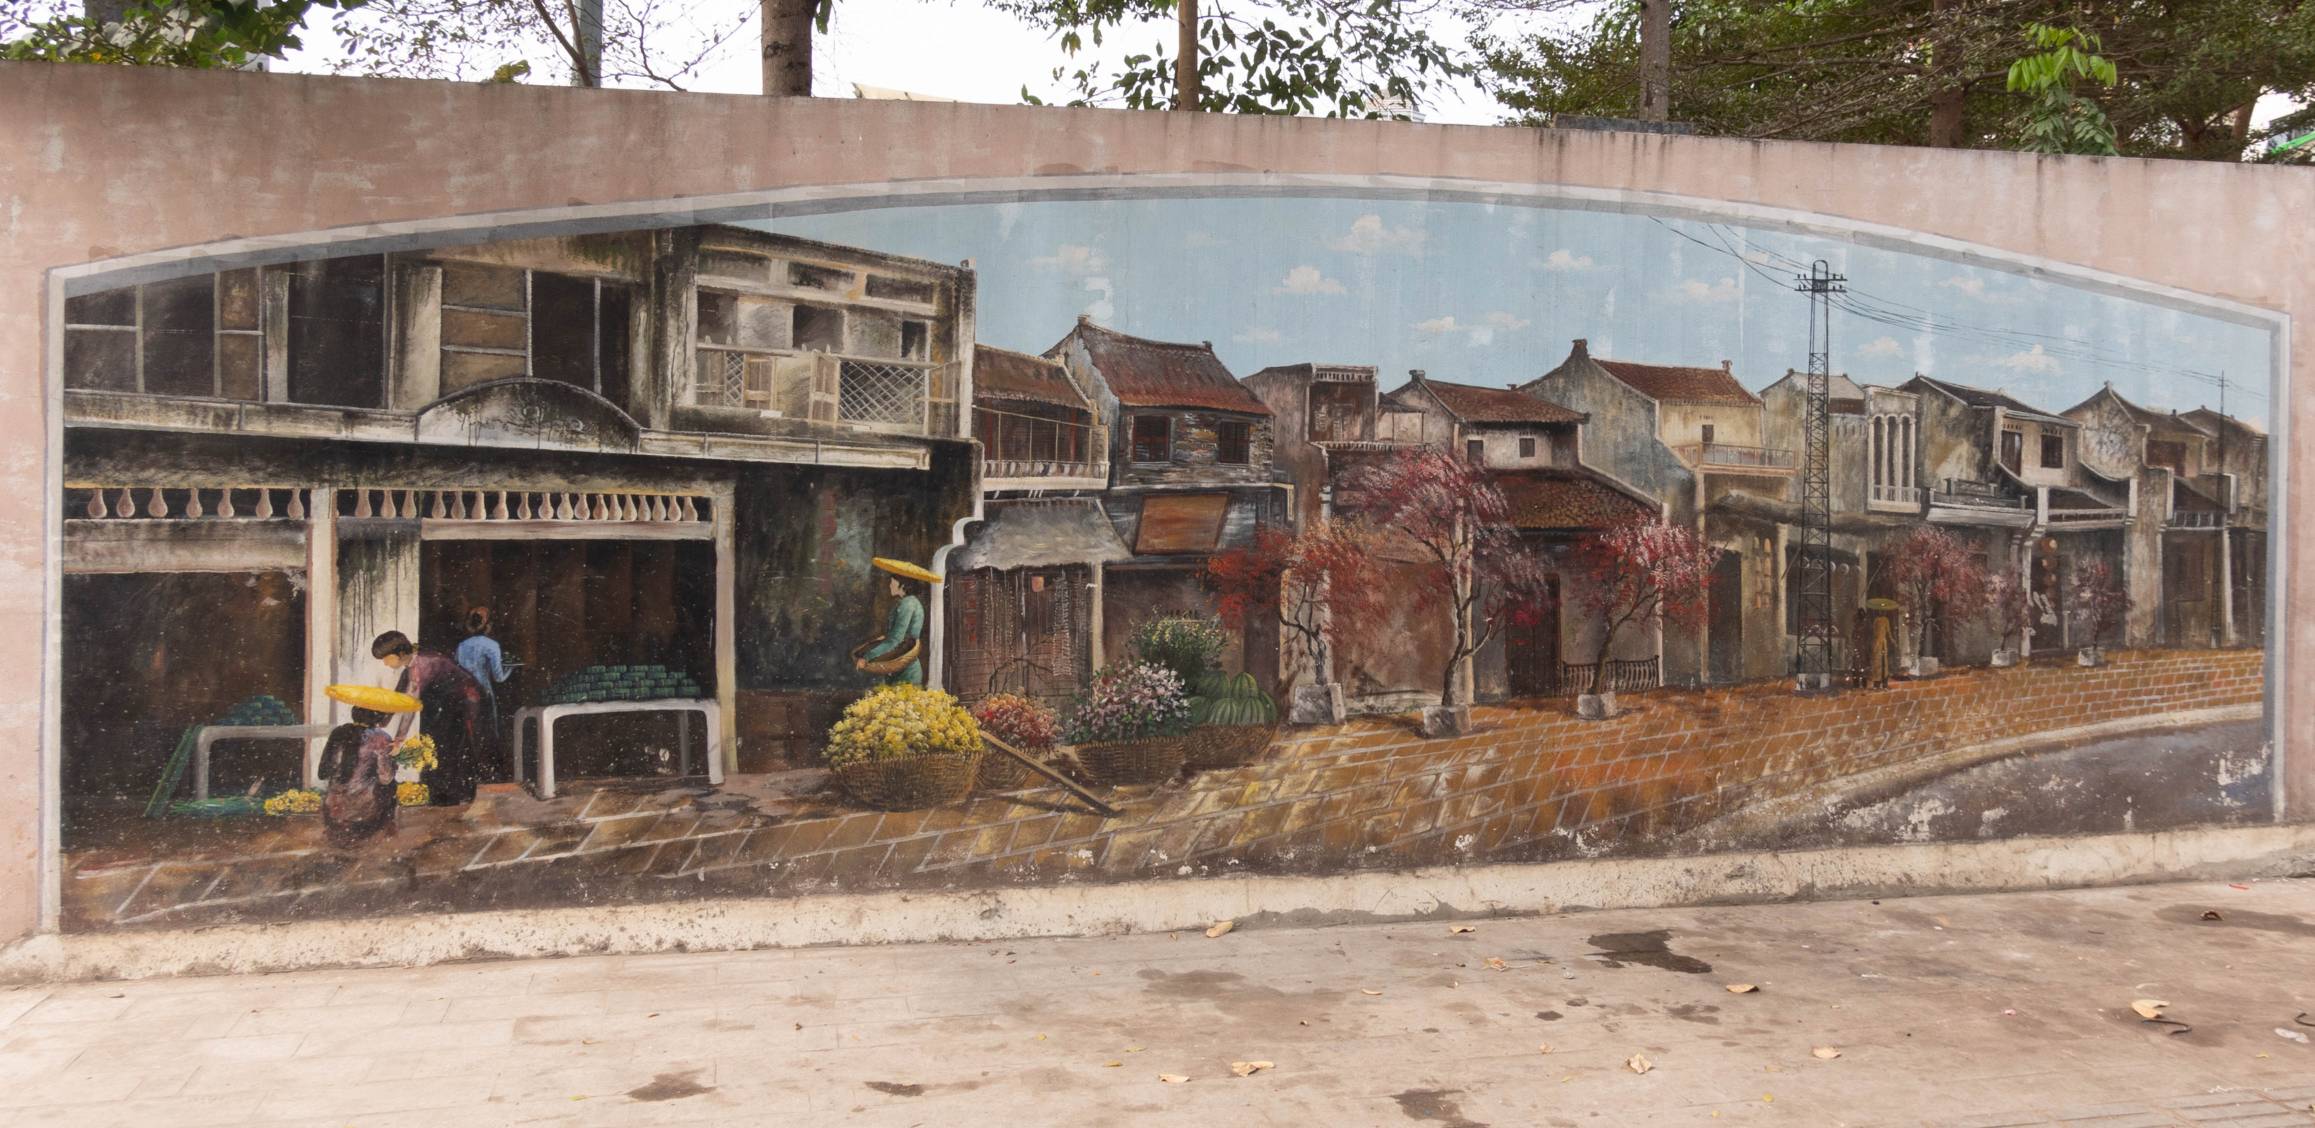 mural on wall of a row of houses. On the left there are people doing something but it is unclear what they are doing.